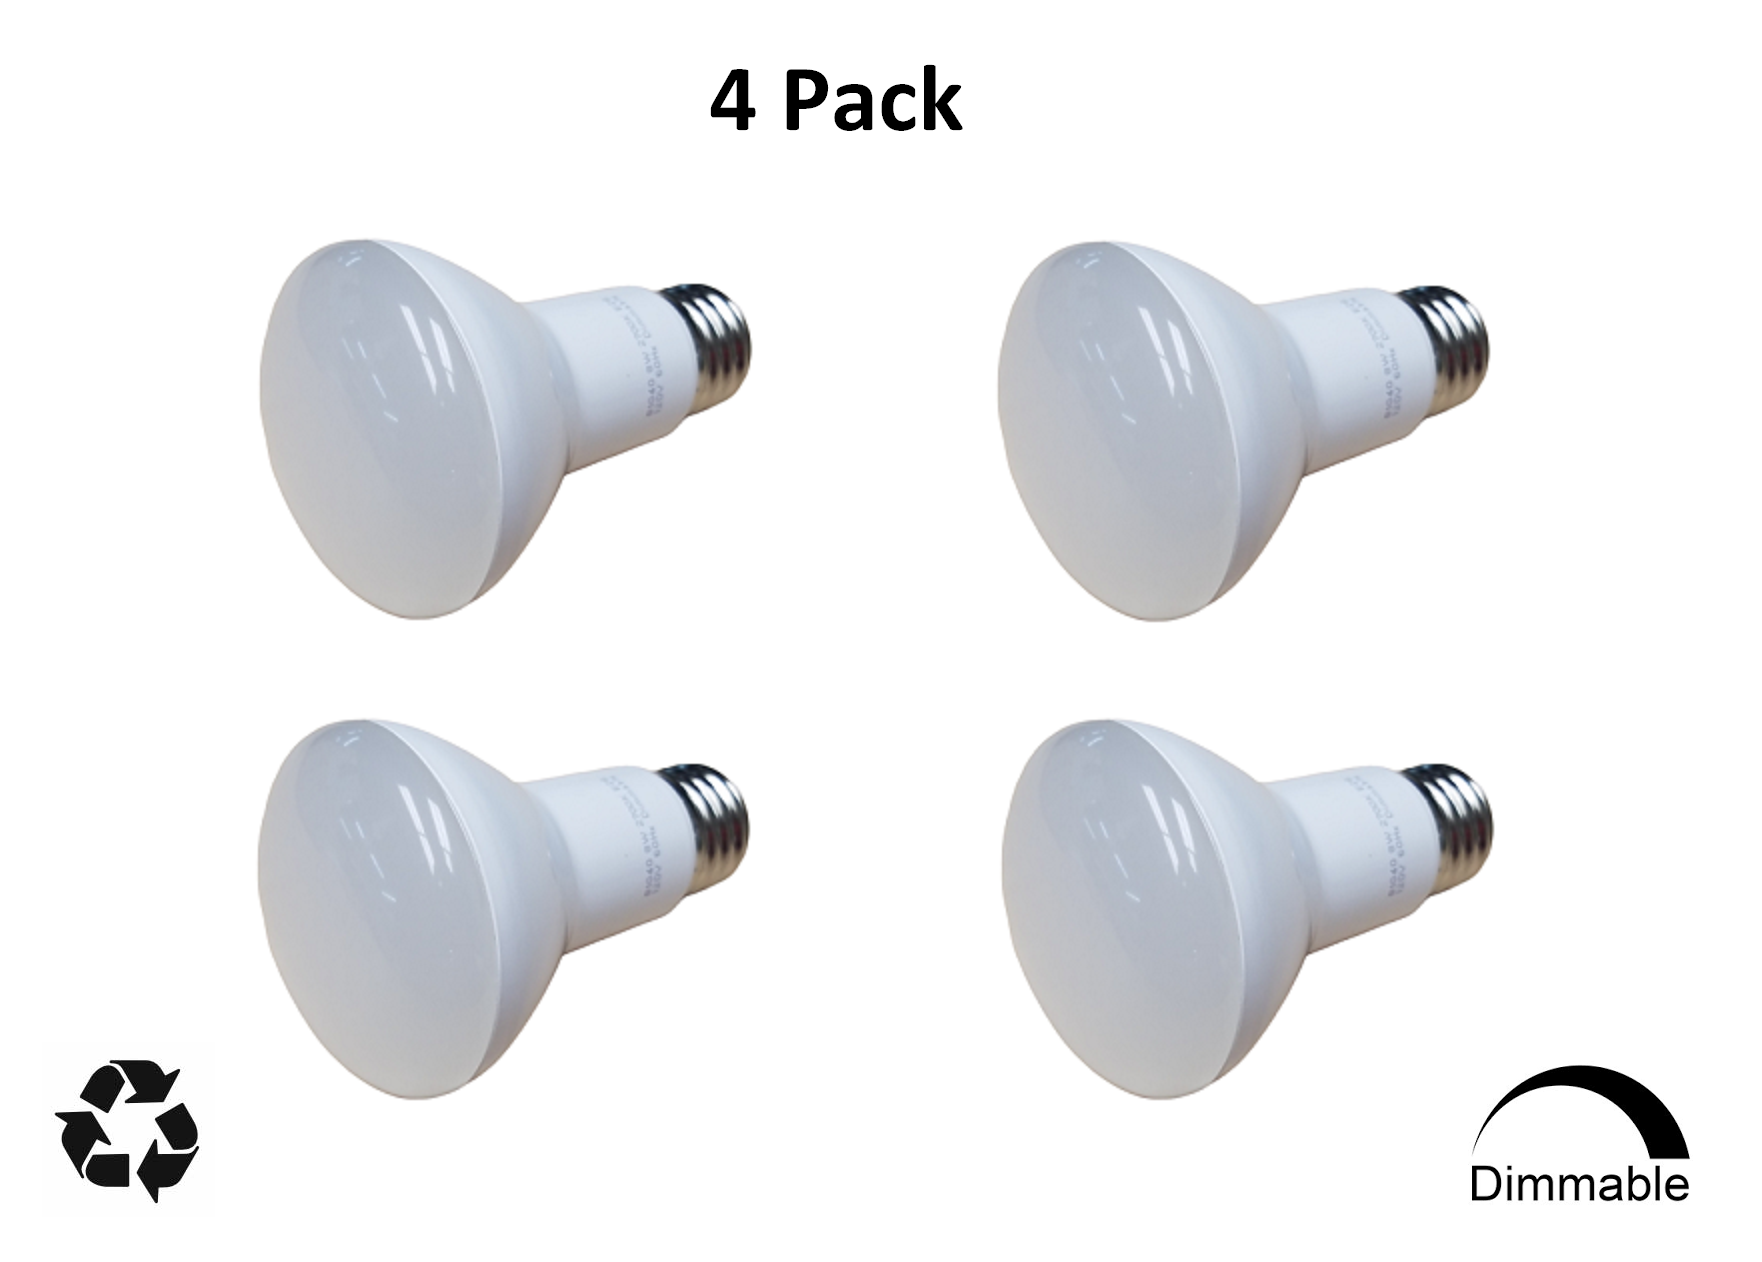 Reliance R20 LED Bulb DImmable Flood 8W 550lm 2700K 60W Equal 4-Pack